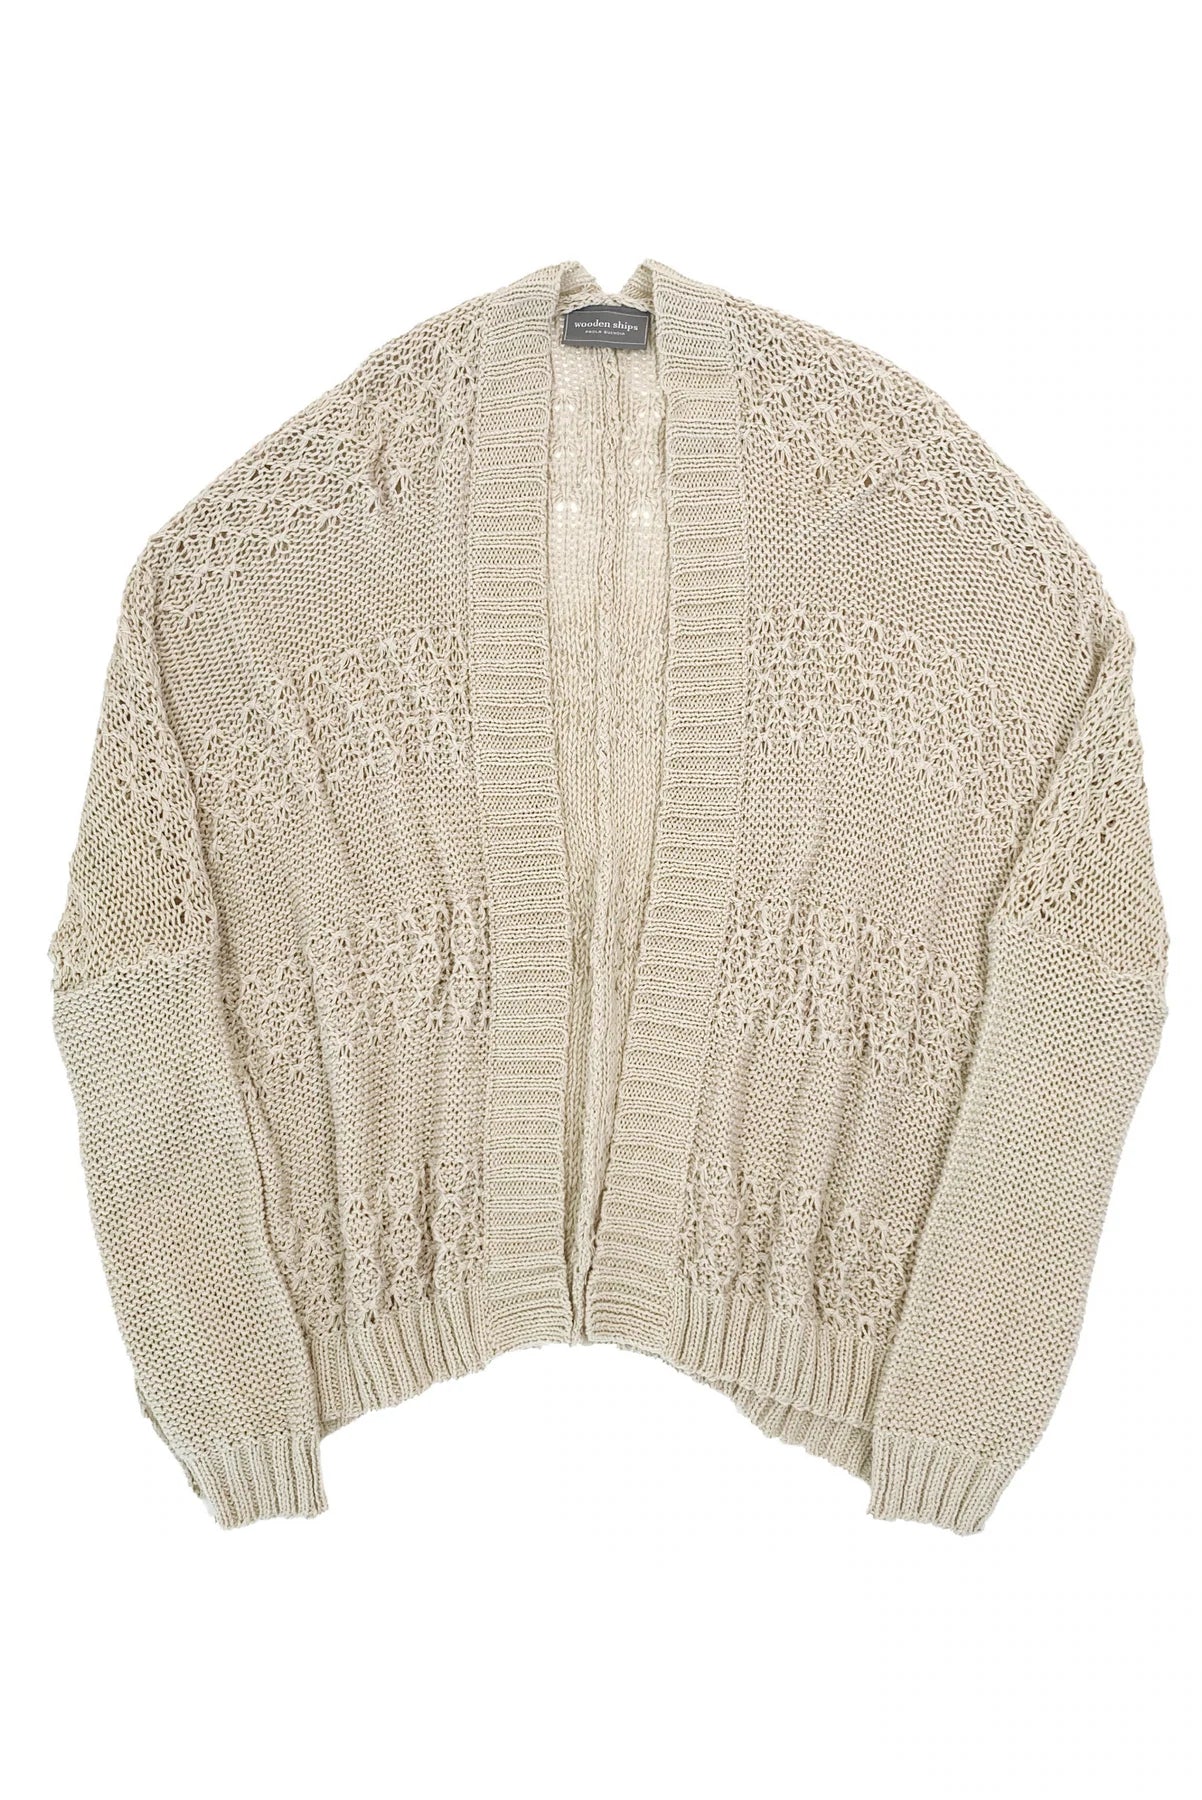 Wooden Ships Lily Cotton Cardigan